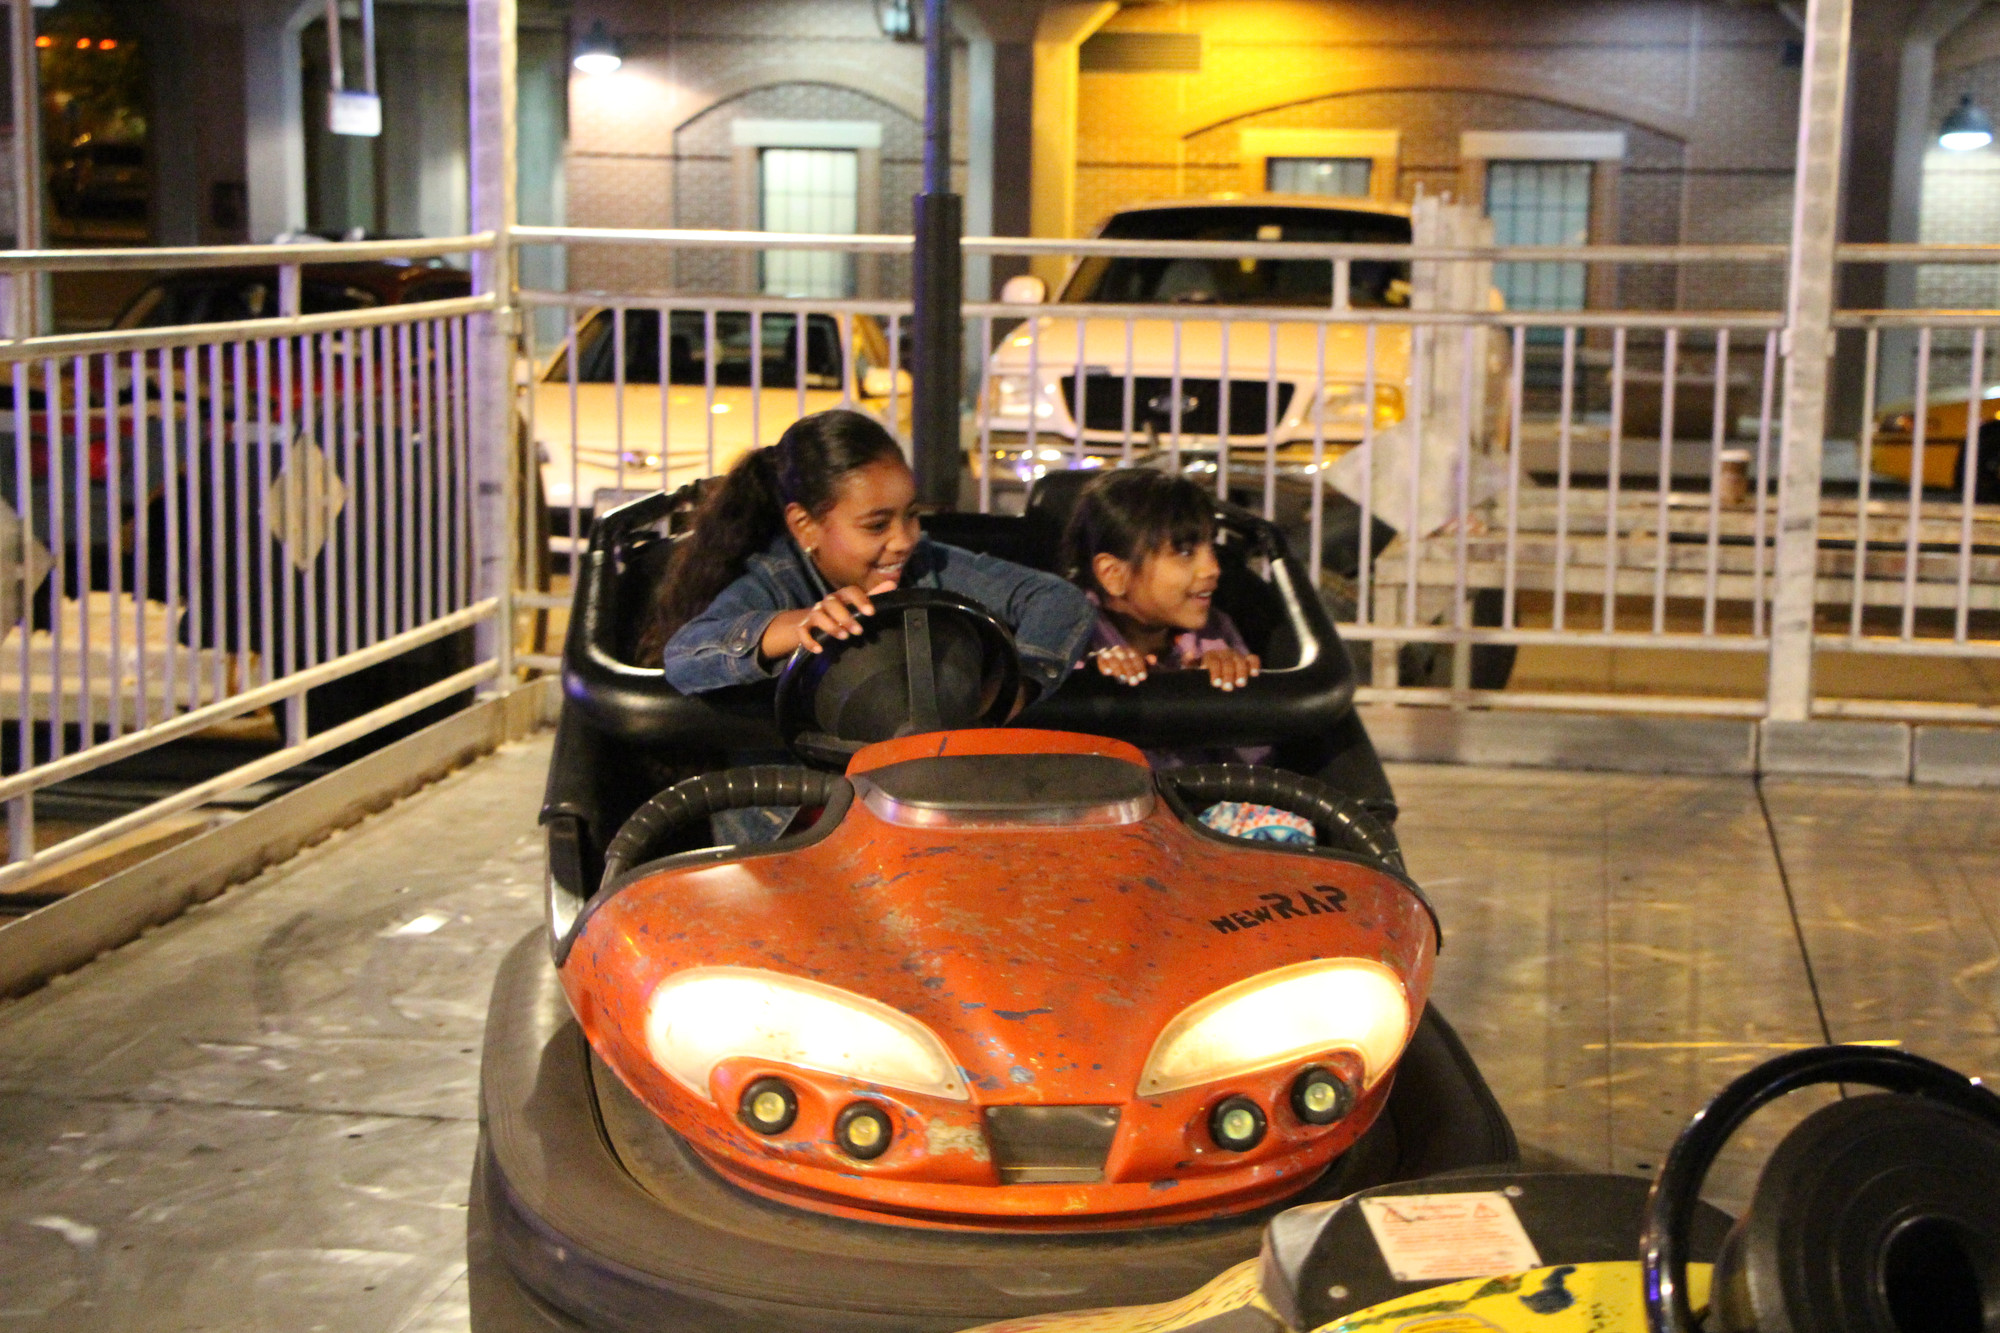 Sisters Valanie, 8, left, and Dezirae Wishropp, 6, drove bumper cars at the Baldwin Chamber of Commerce carnvial, which was held from May 29 to June 1 at the Long Island Rail Road station.